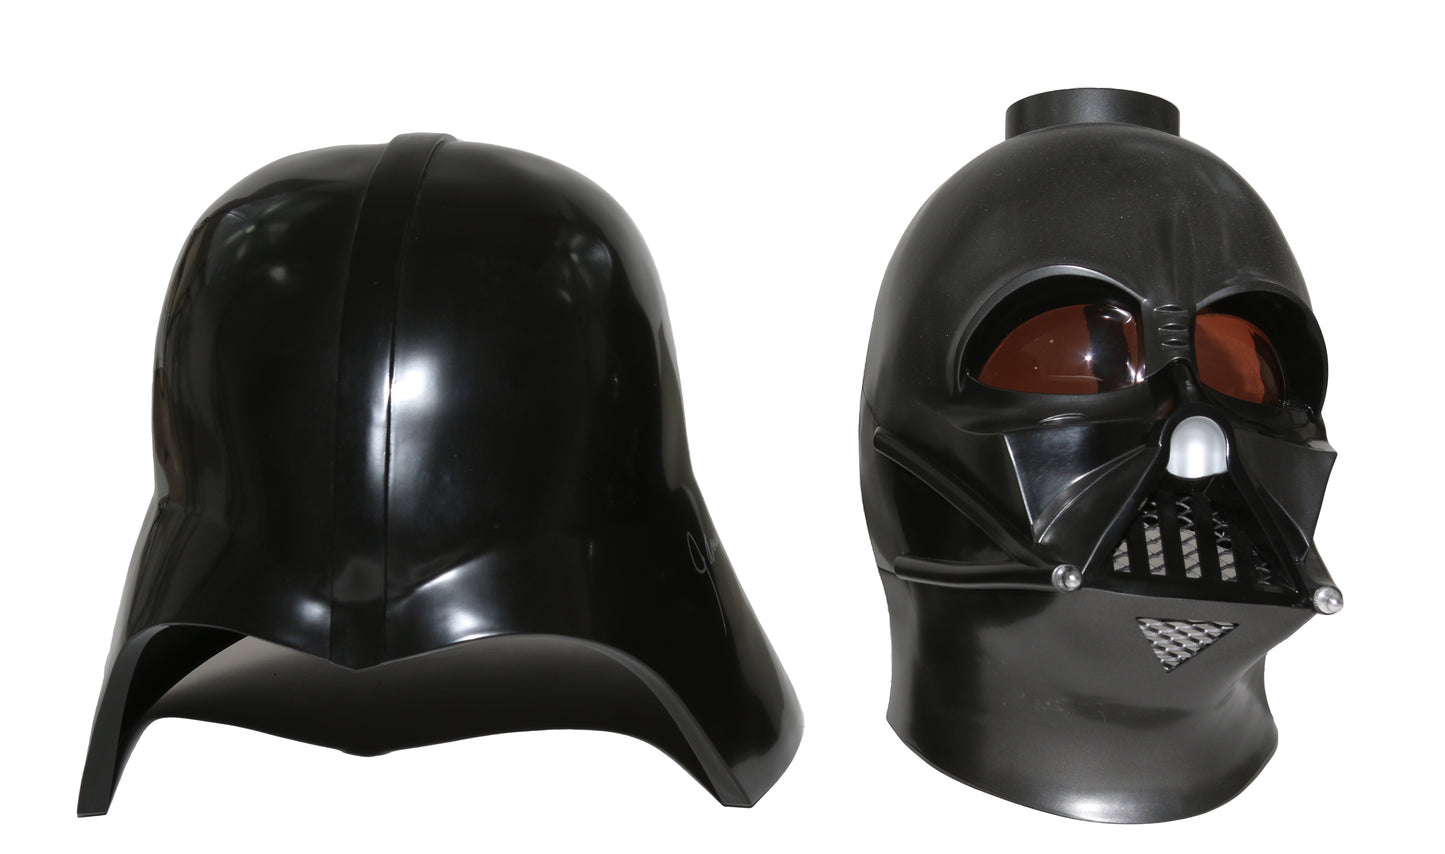 
                  
                    Star Wars: A New Hope EFX Collectibles Precision Cast Replica Darth Vader Helmet Signed by James Earl Jones & Dave Prowse
                  
                